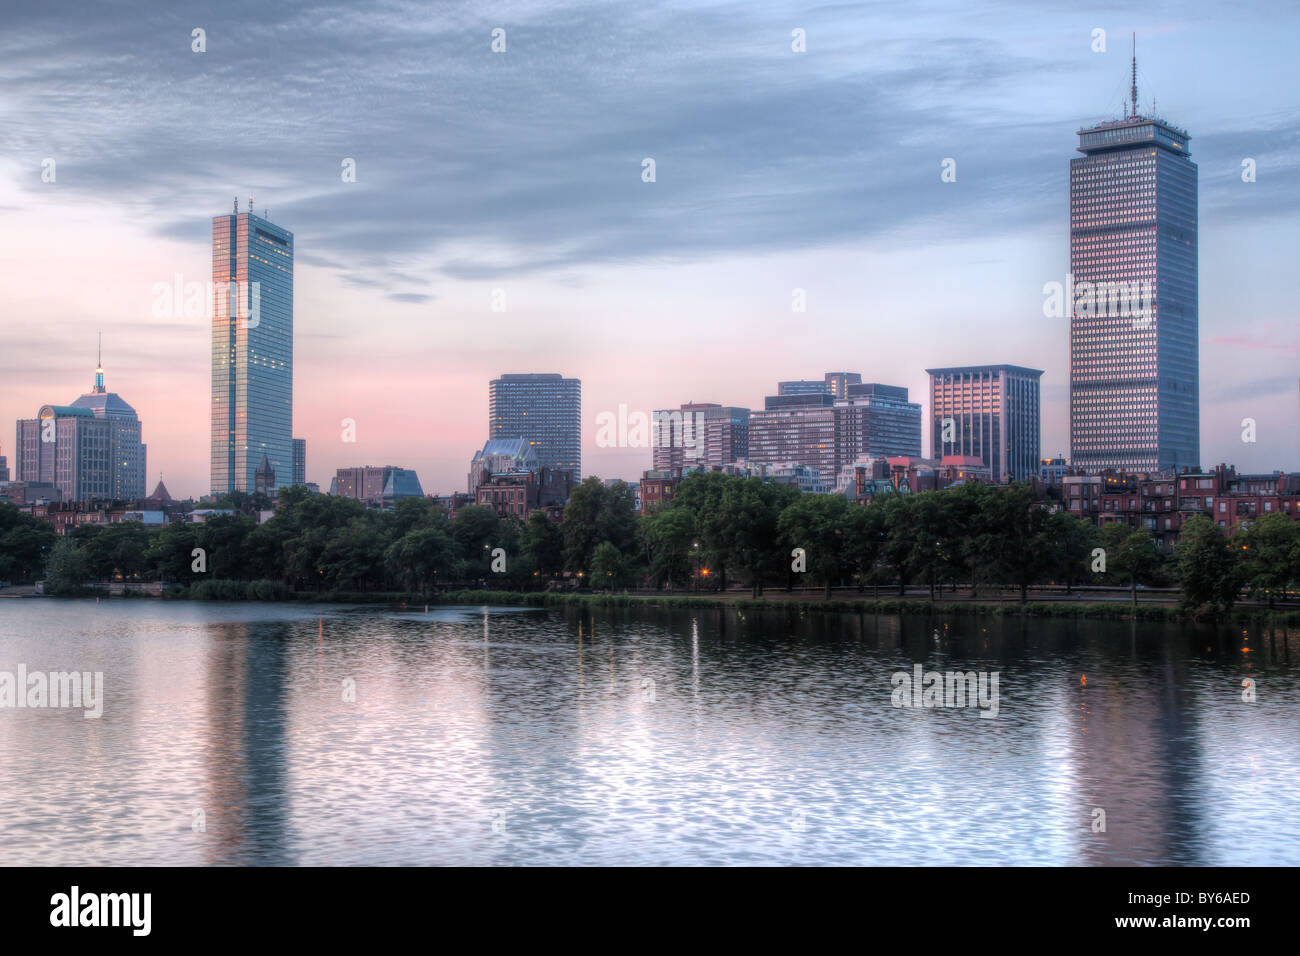 The Boston skyline including the John Hancock and Prudential Center viewed over the Charles River at twilight in Boston, Massachusetts. Stock Photo